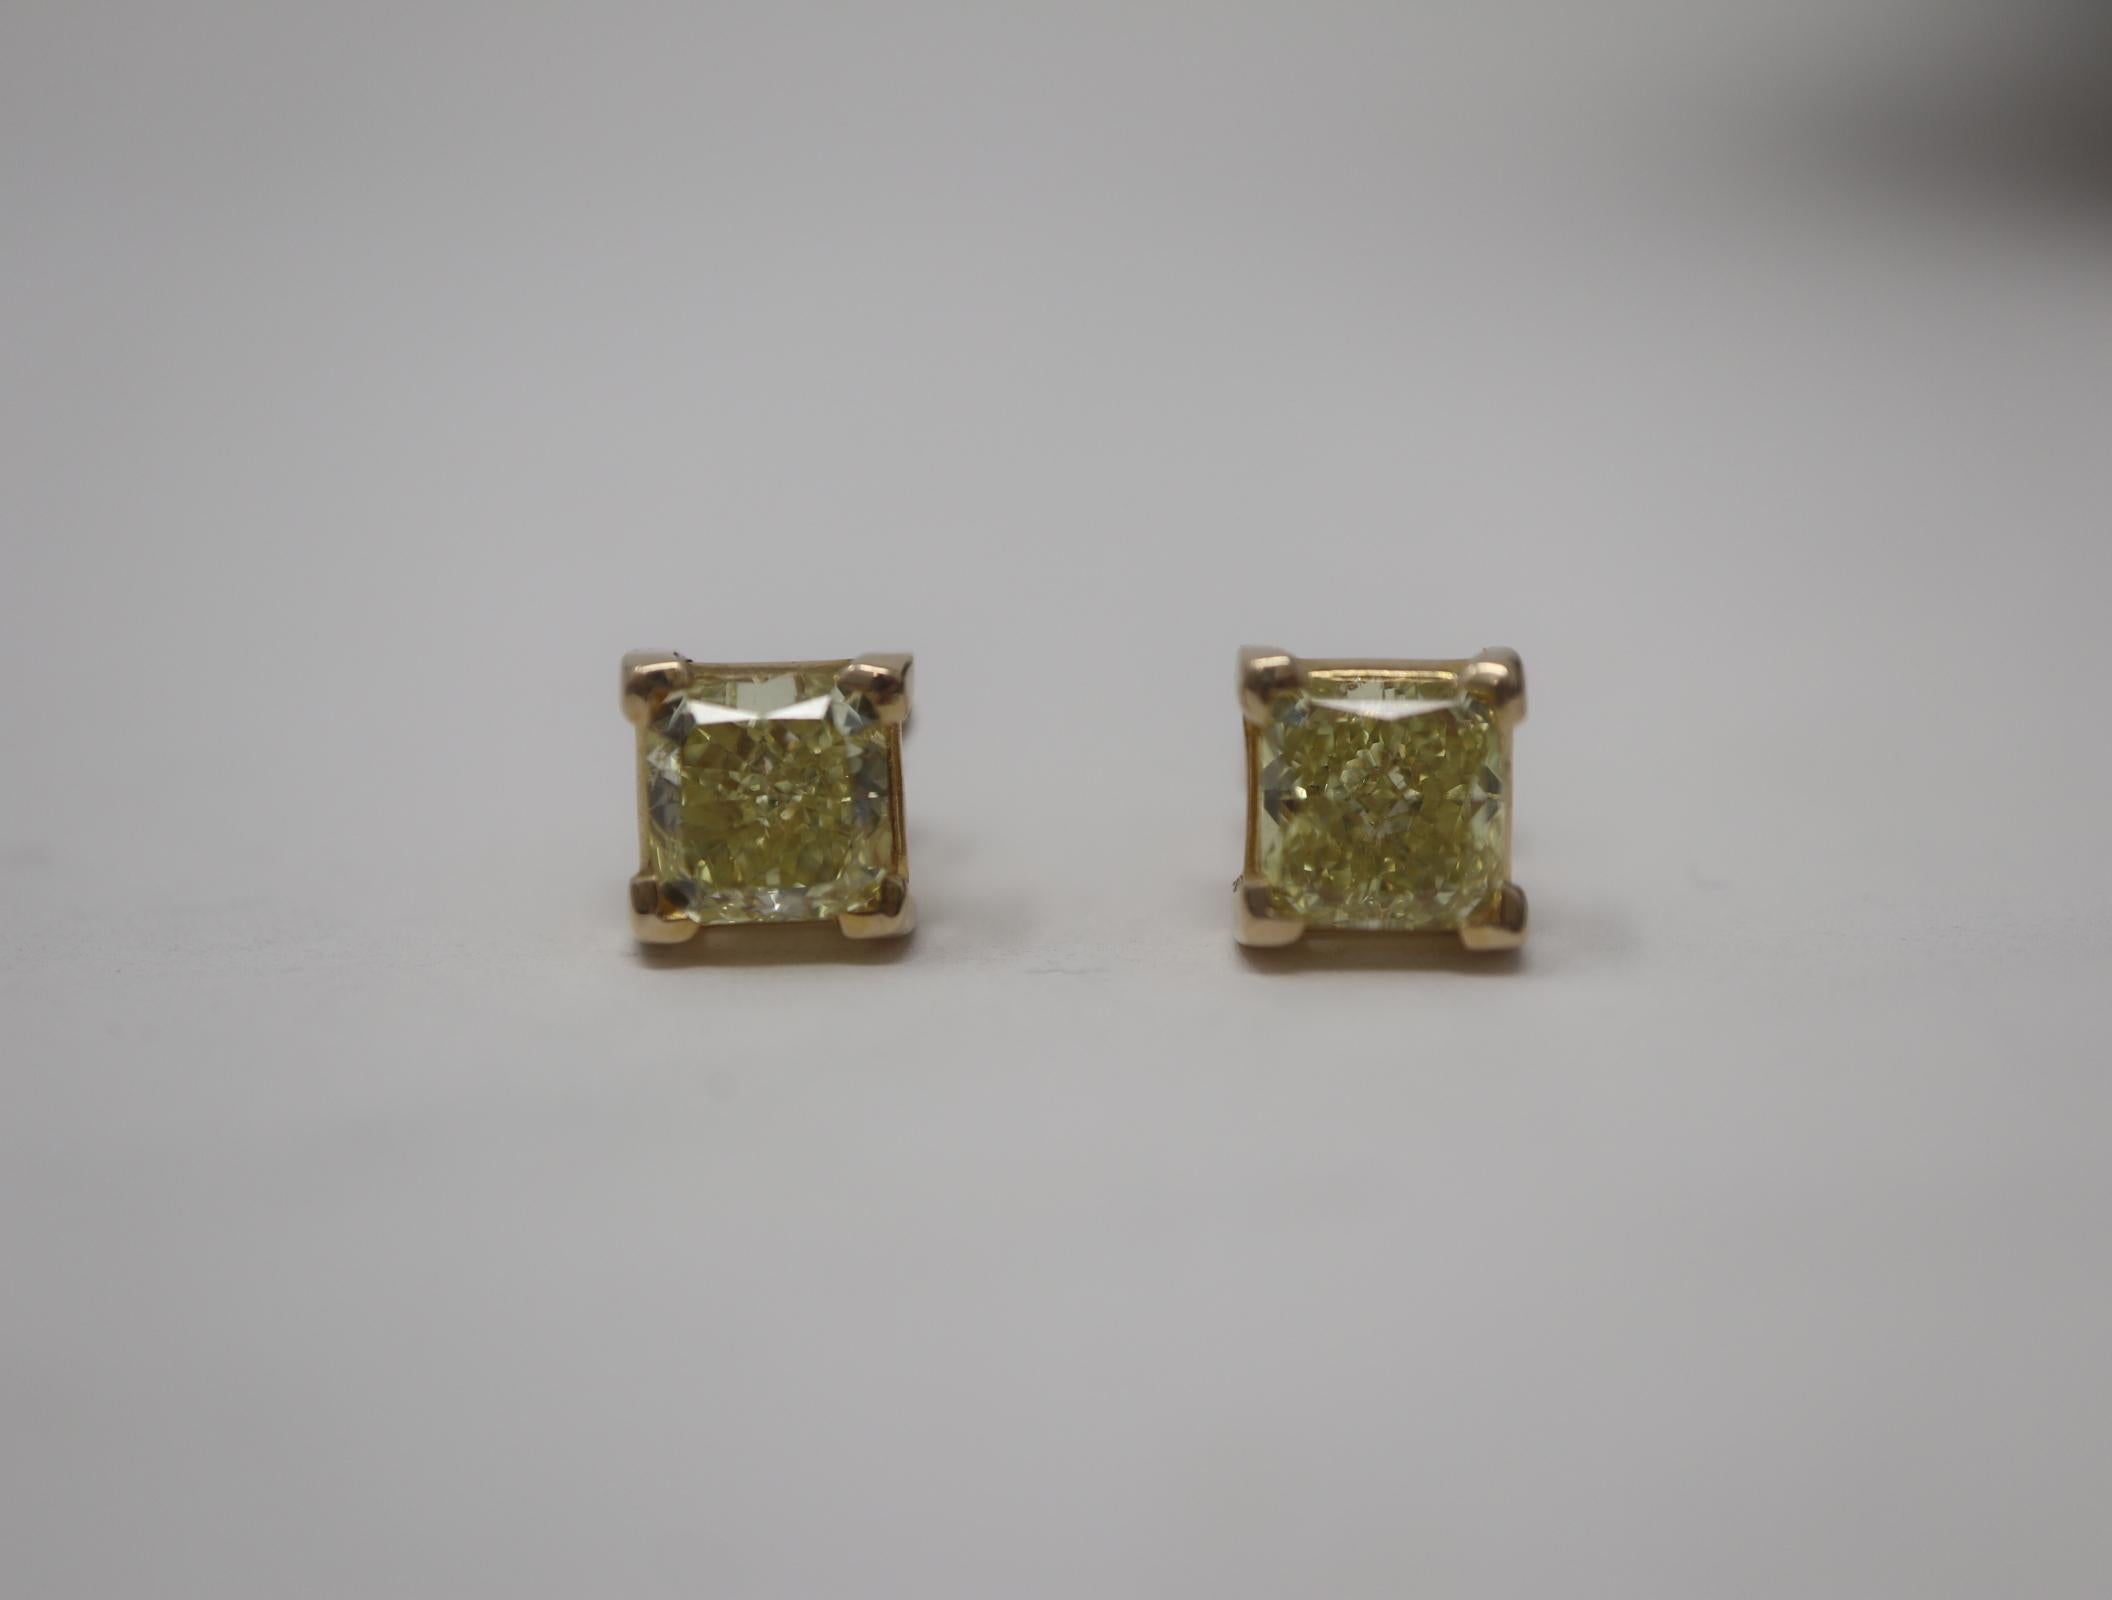 2.49CTW Fancy Intense Yellow Princess Cut Stud Earrings 14KY SI1 GIA In New Condition For Sale In Carmel-by-the-Sea, CA